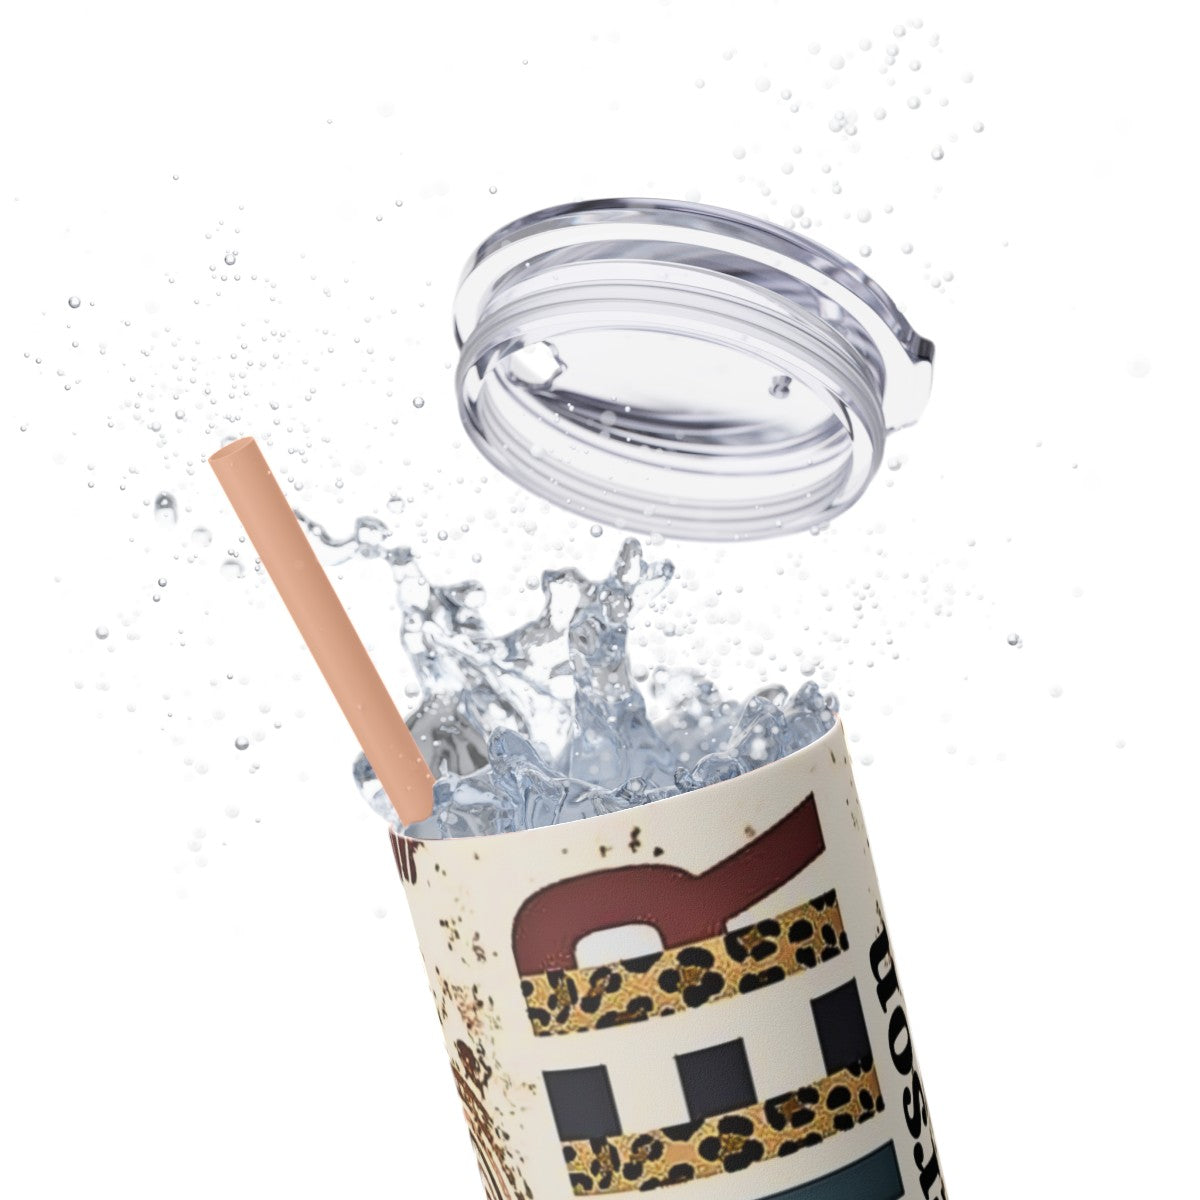 Get trendy with Personalized Teacher Skinny Tumbler with Straw, 20oz -  available at Good Gift Company. Grab yours for $44.20 today!